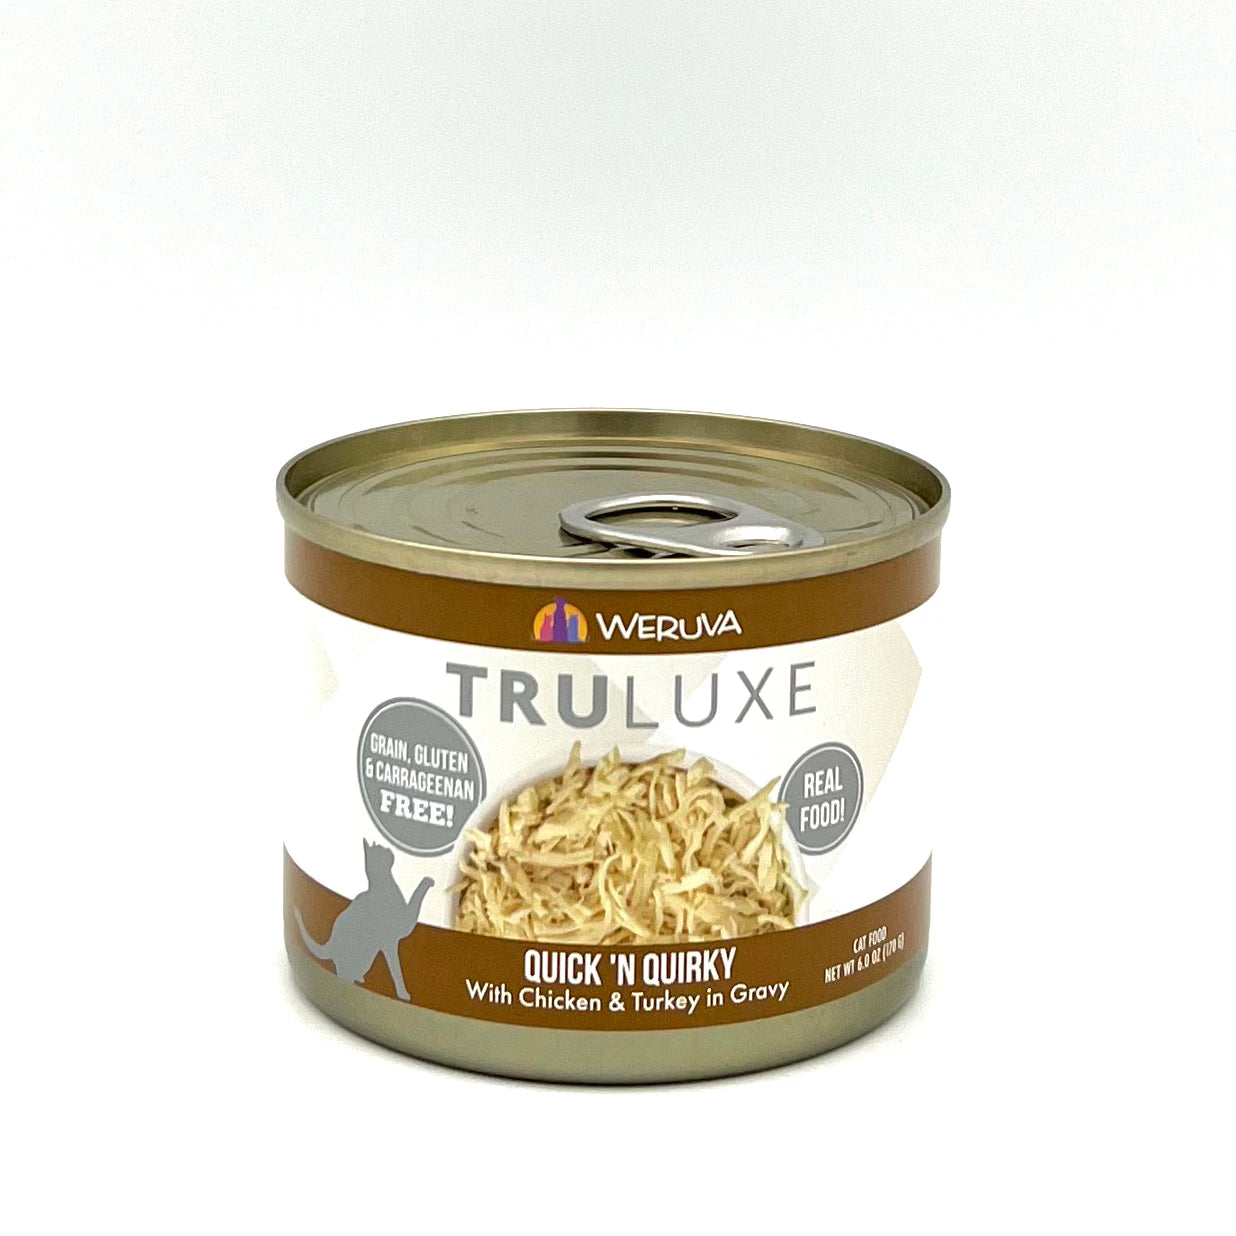 Truluxe Quick N Quirky 6oz